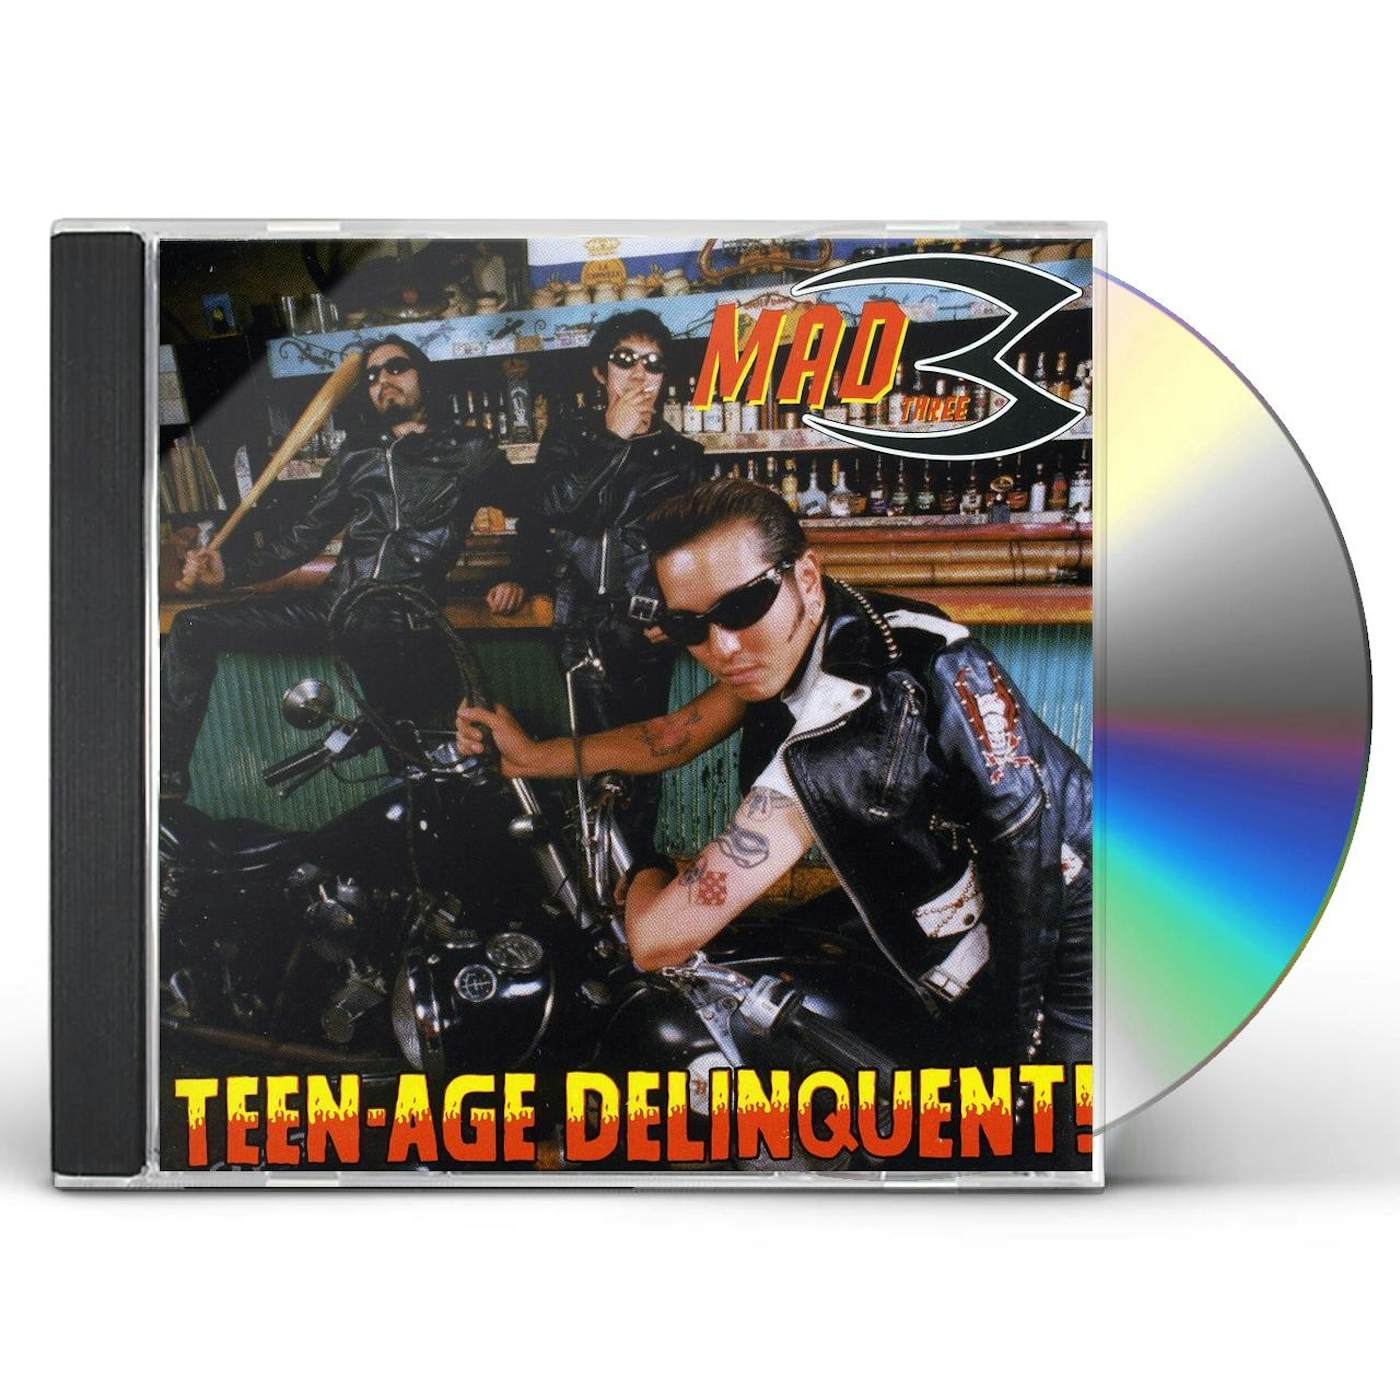 Mad 3 TEENAGE DELINQUENT CD